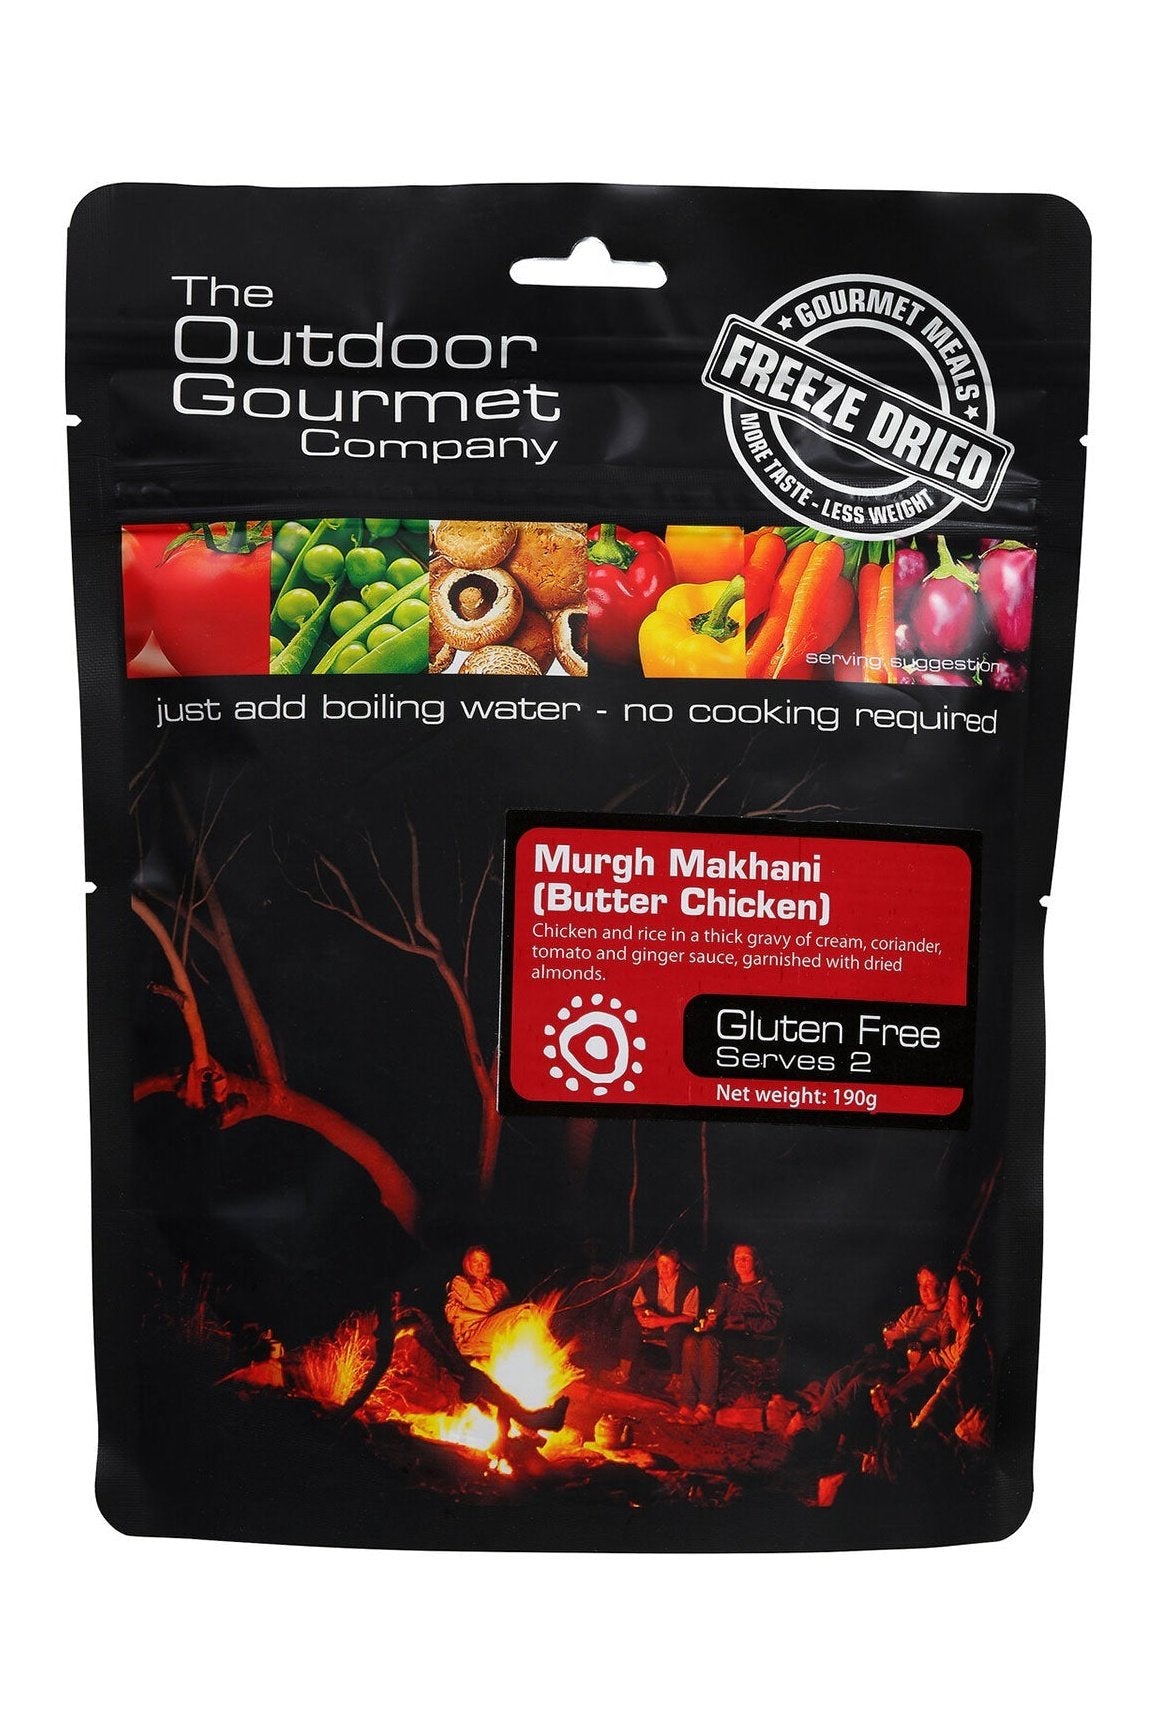 The Outdoor Gourmet Company - Butter Chicken The Outdoor Gourmet Company Rugged Ram Outdoors